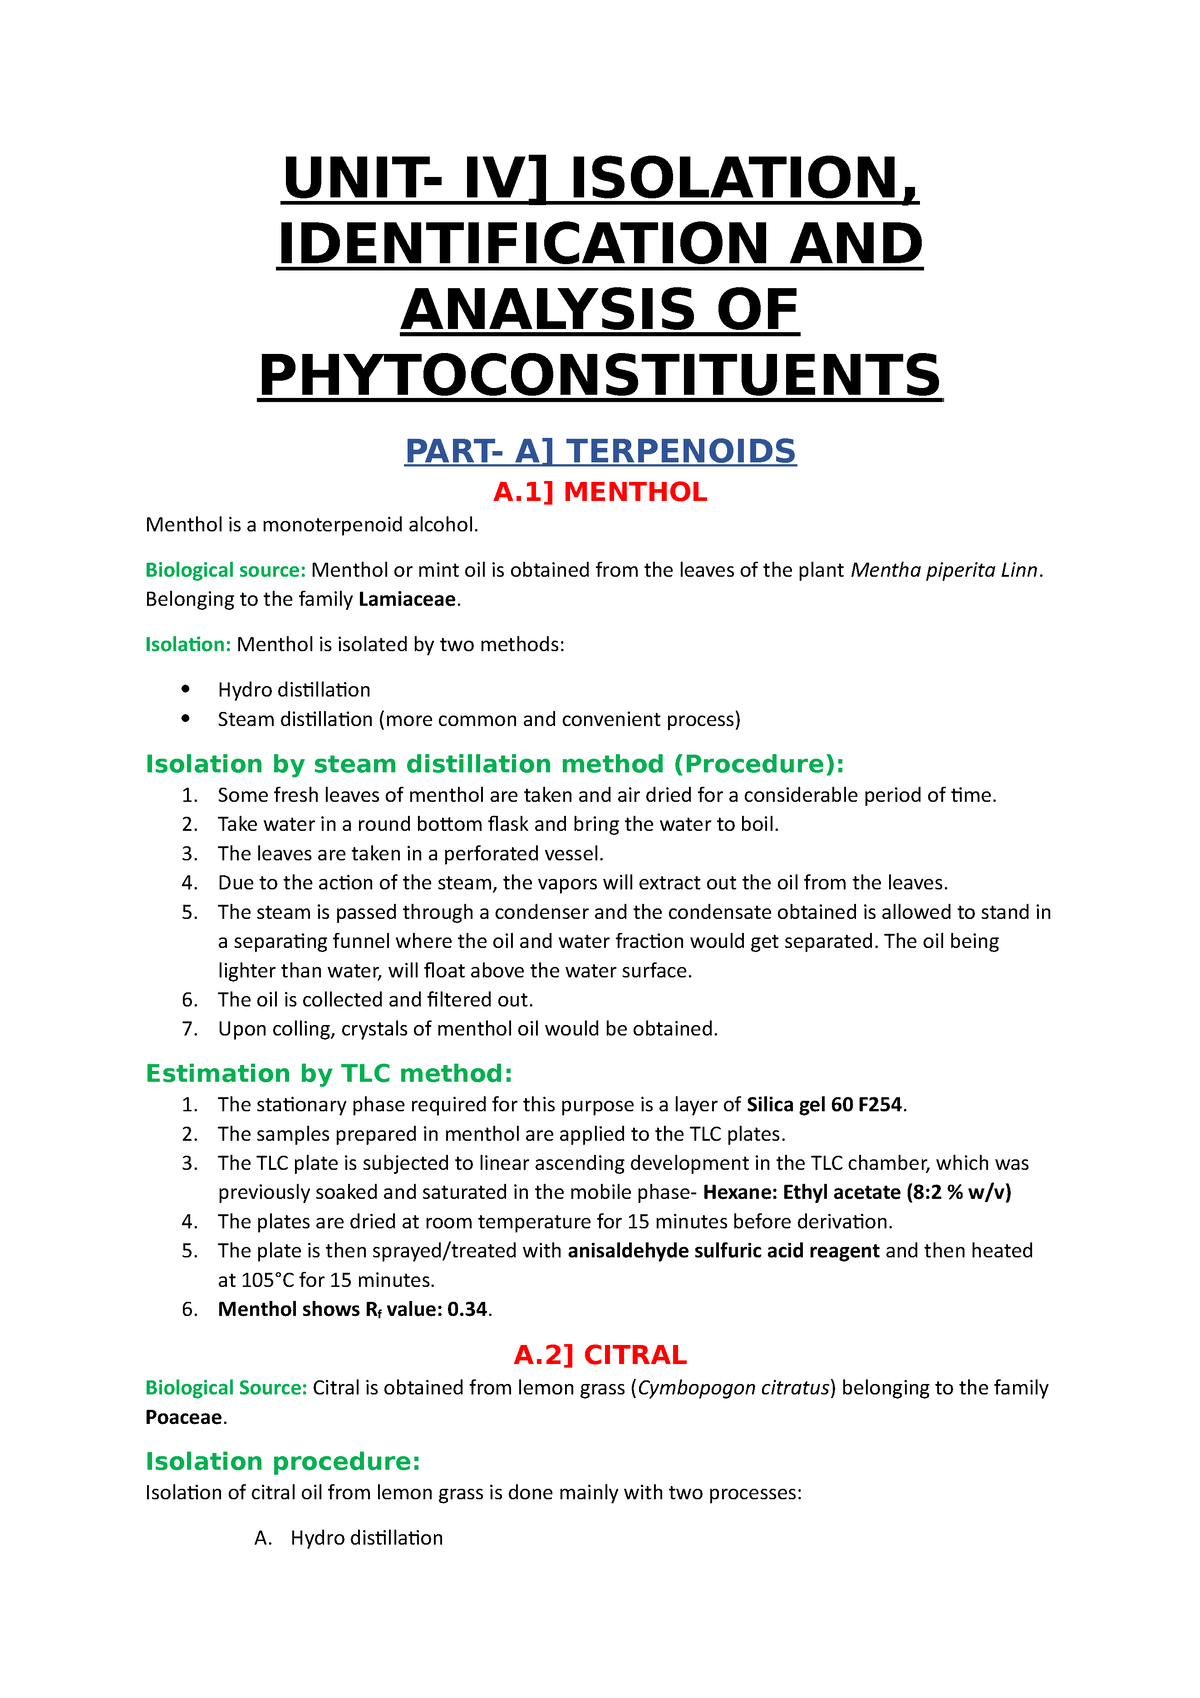 Isolation,identification and analysis of phytoconstituents. Dr.U